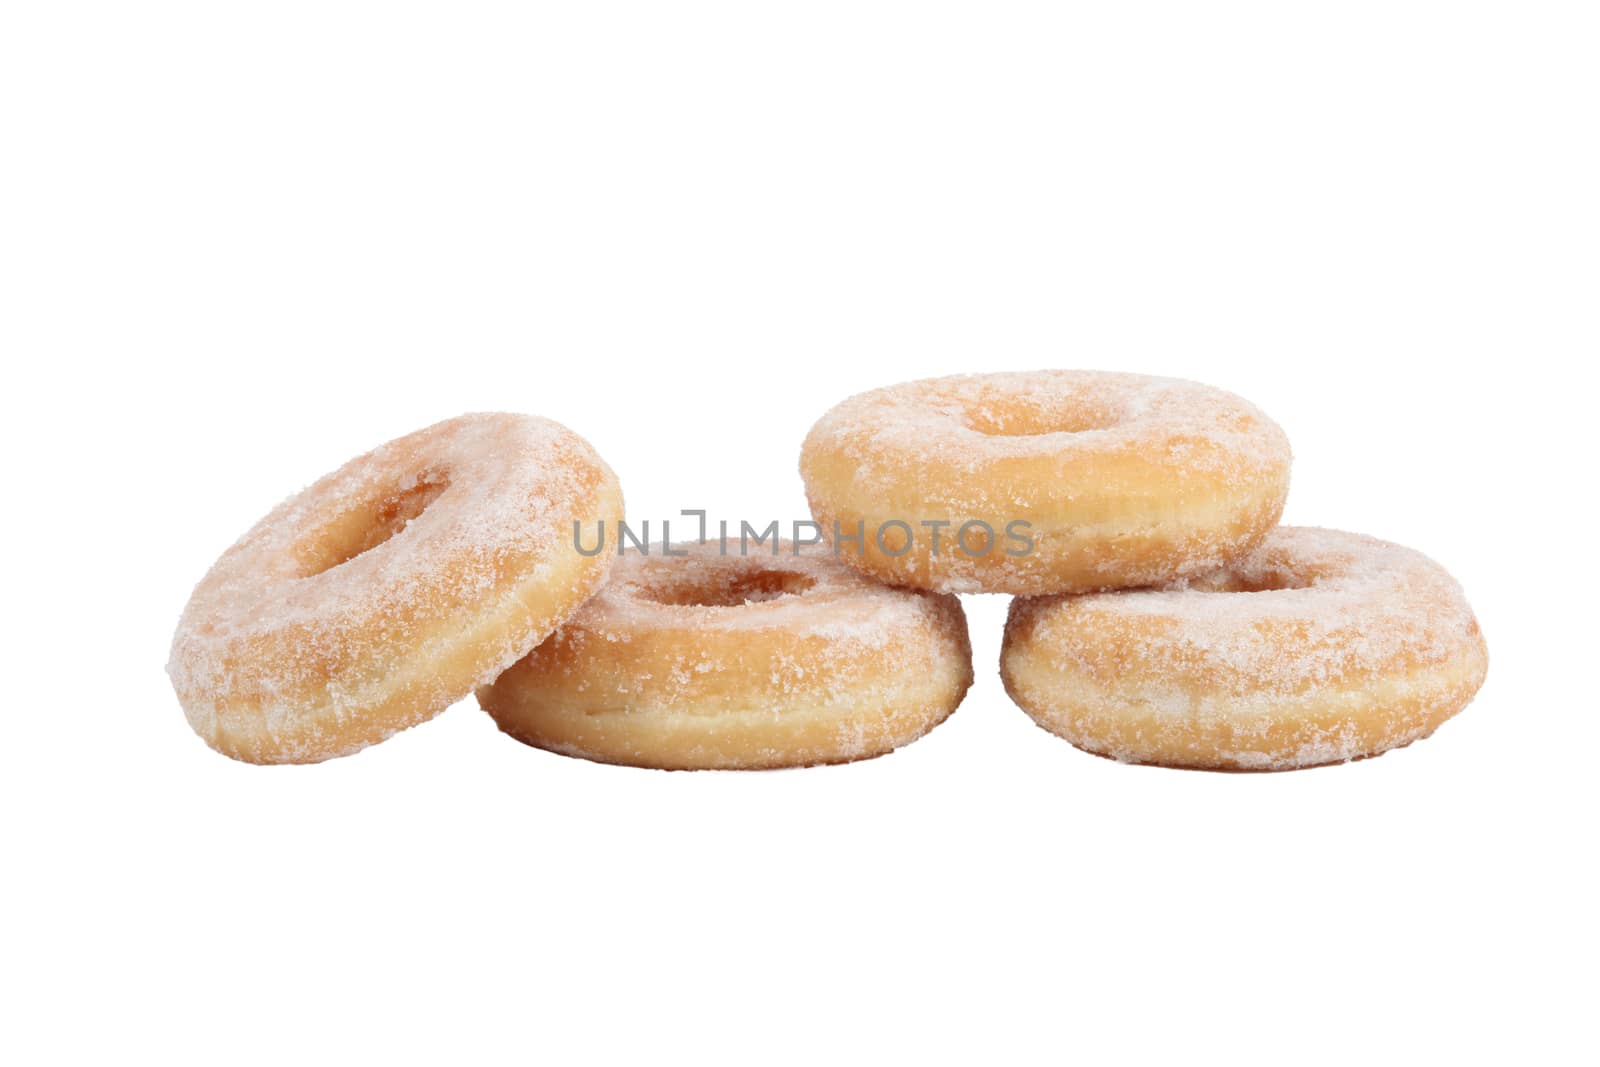 Ring doughnuts by phovoir